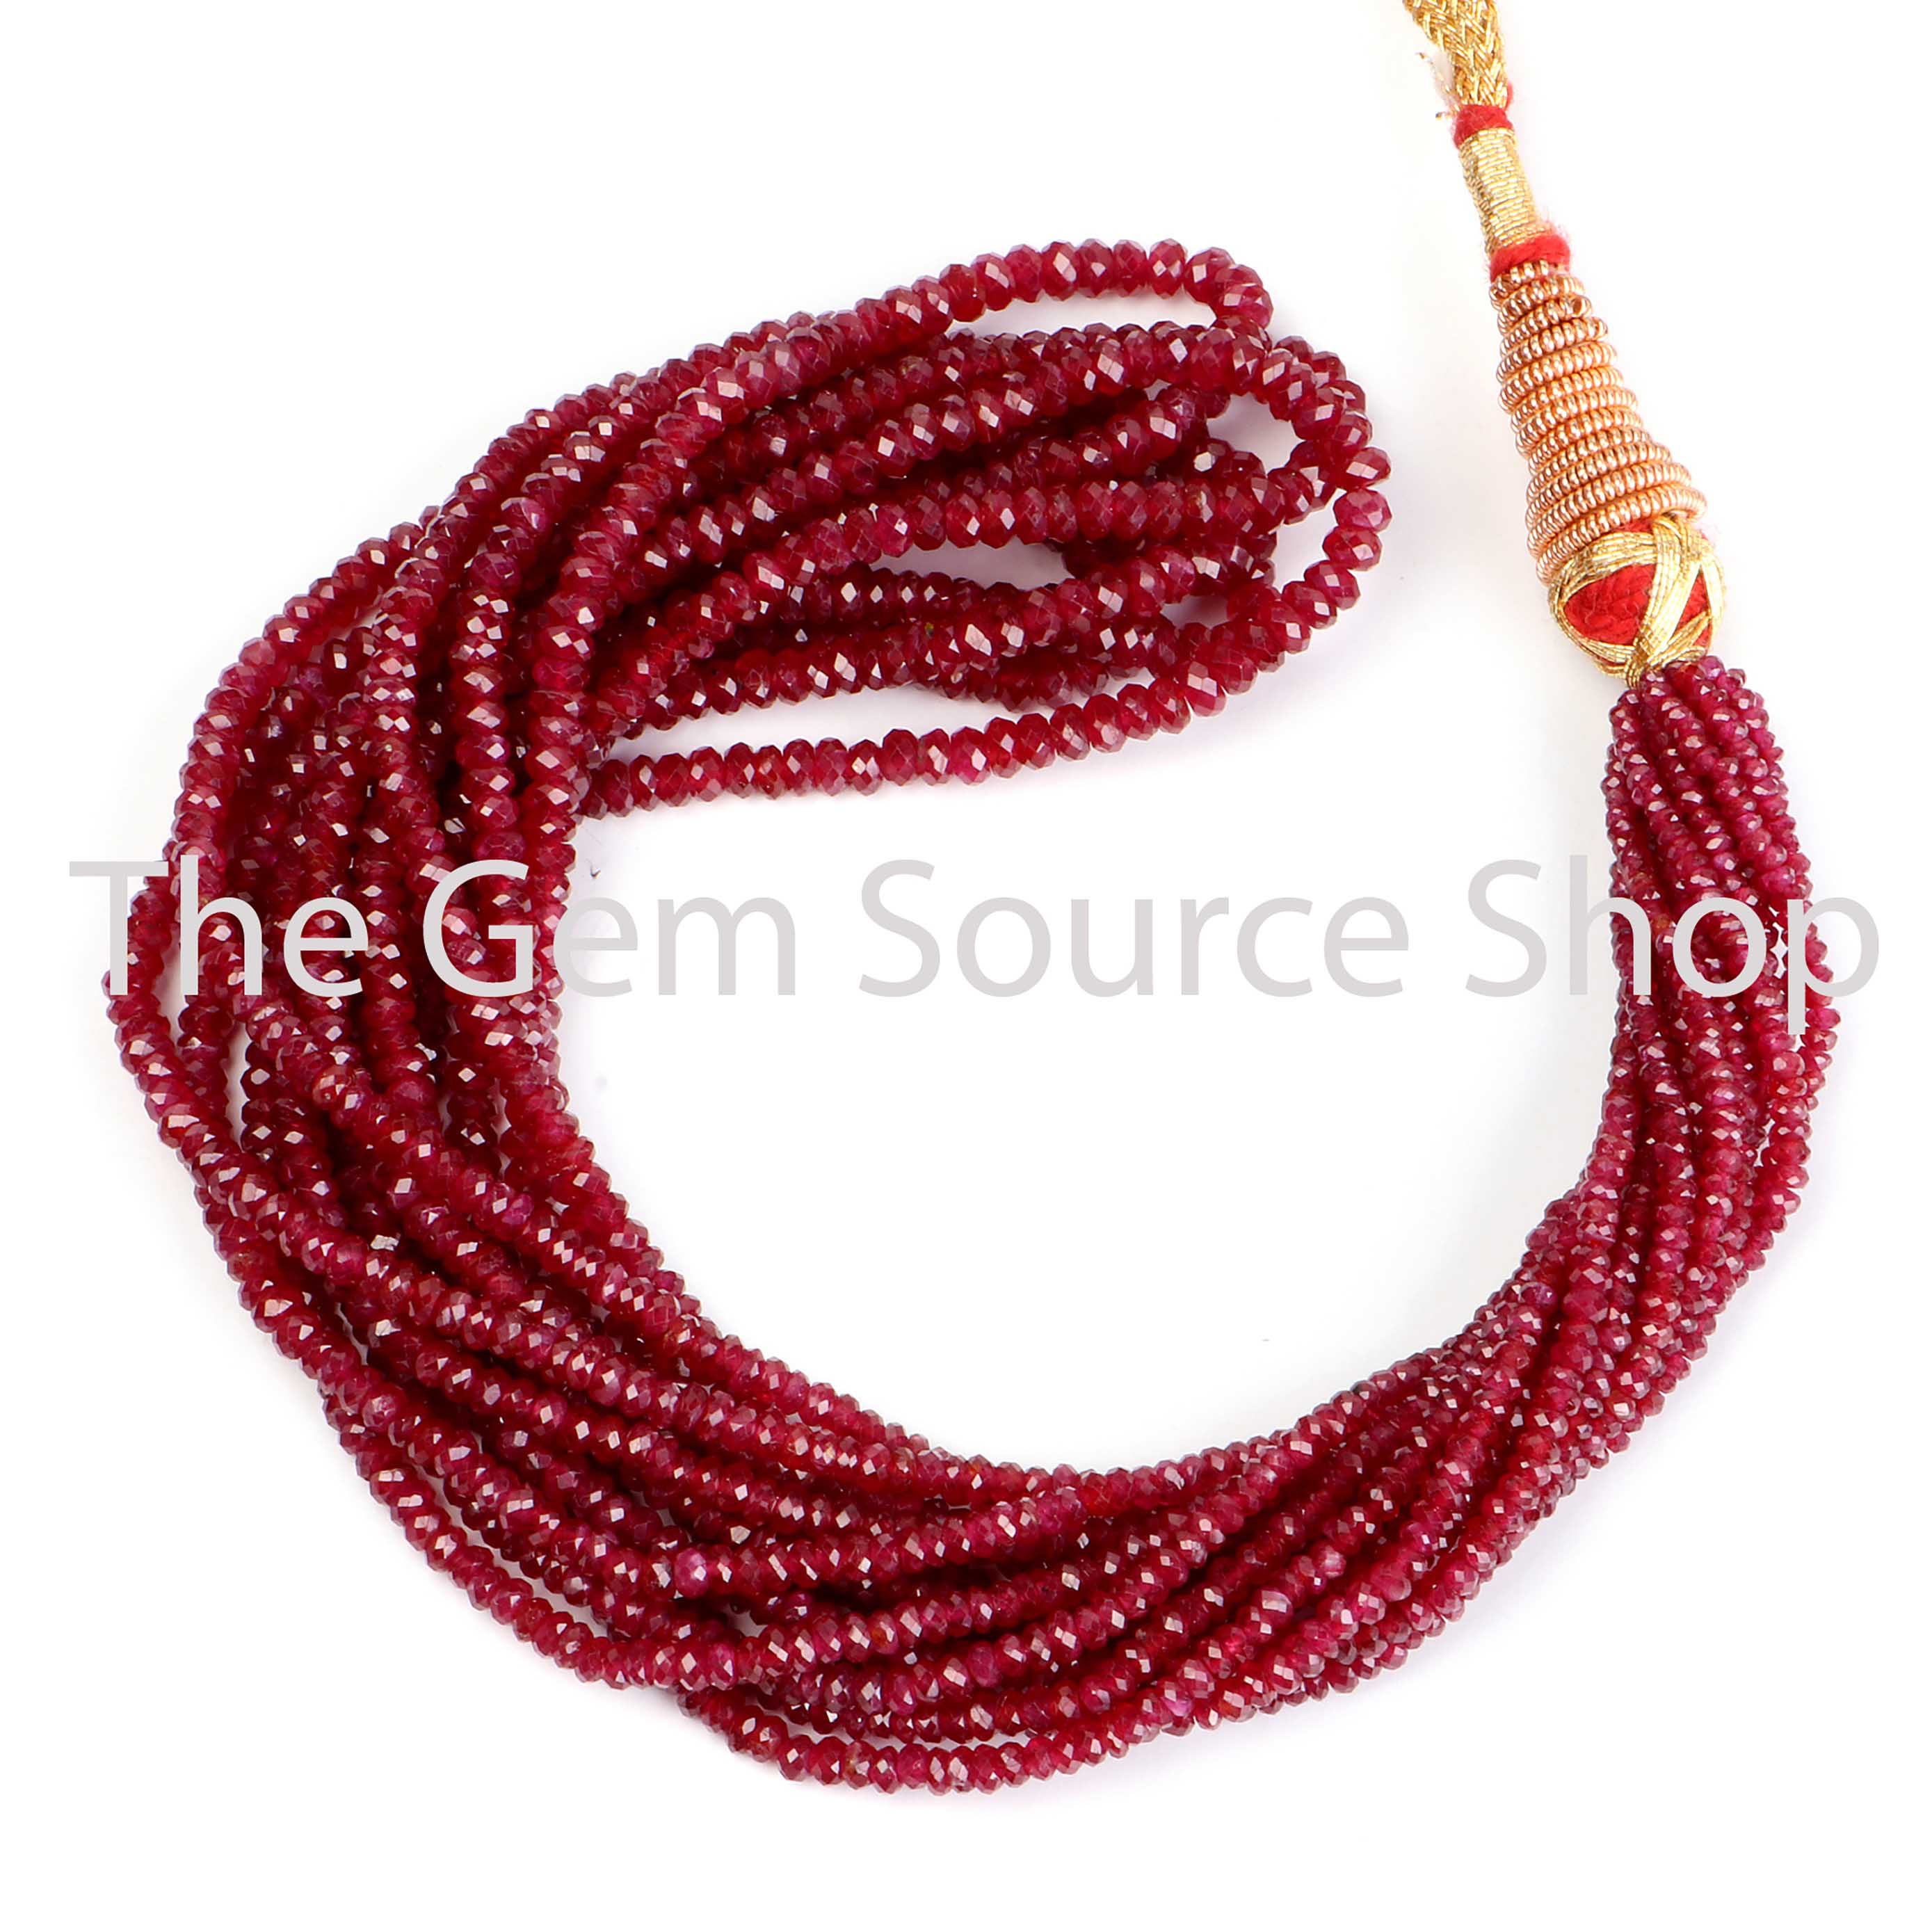 1.75-3.25 mm - Natural Ruby Faceted Rondelle Shape Gemstone Beads